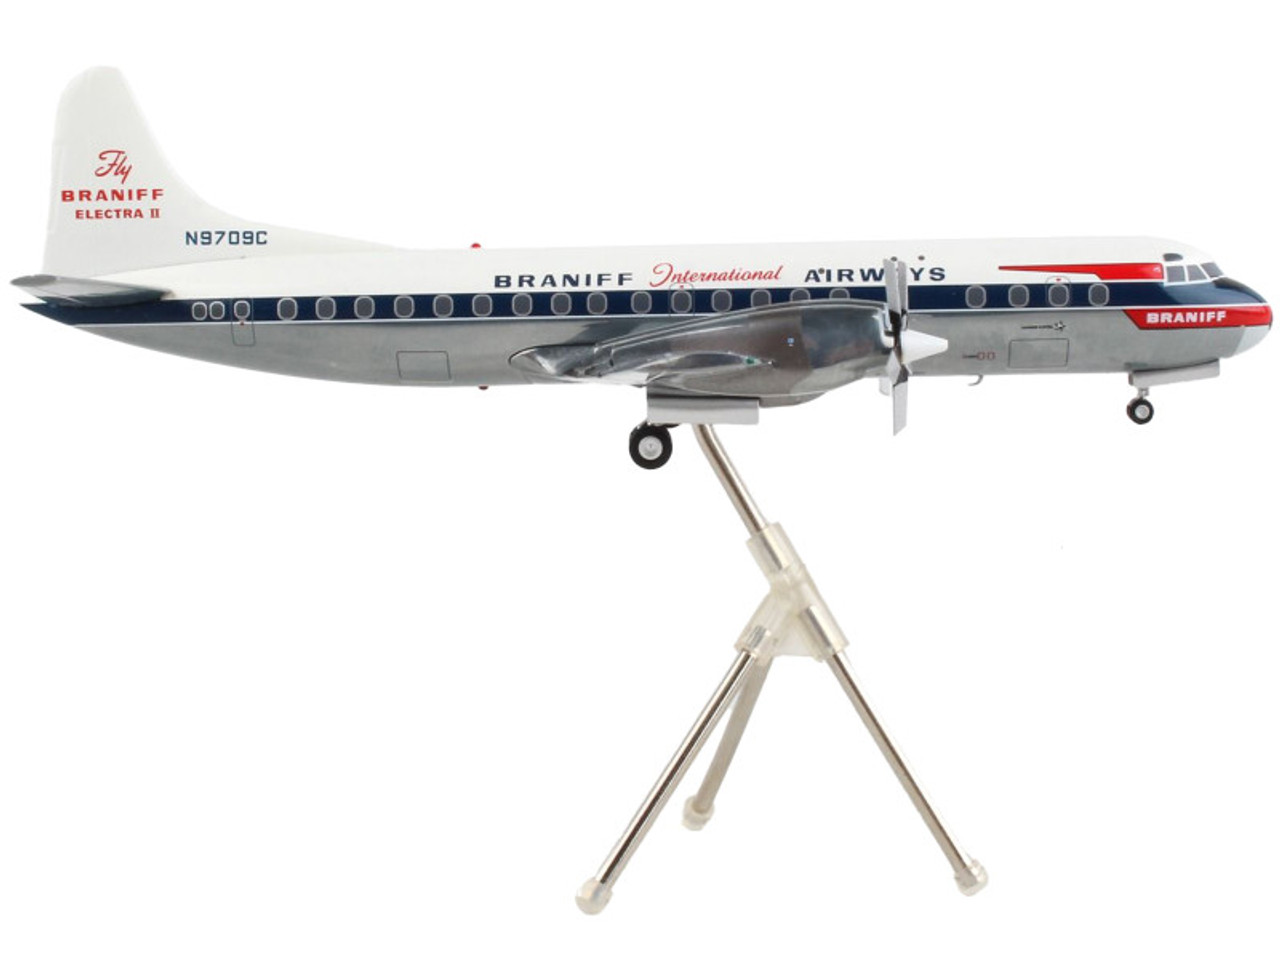 Lockheed L-188 Electra Commercial Aircraft "Braniff International Airways" White with Blue Stripes "Gemini 200" Series 1/200 Diecast Model Airplane by GeminiJets